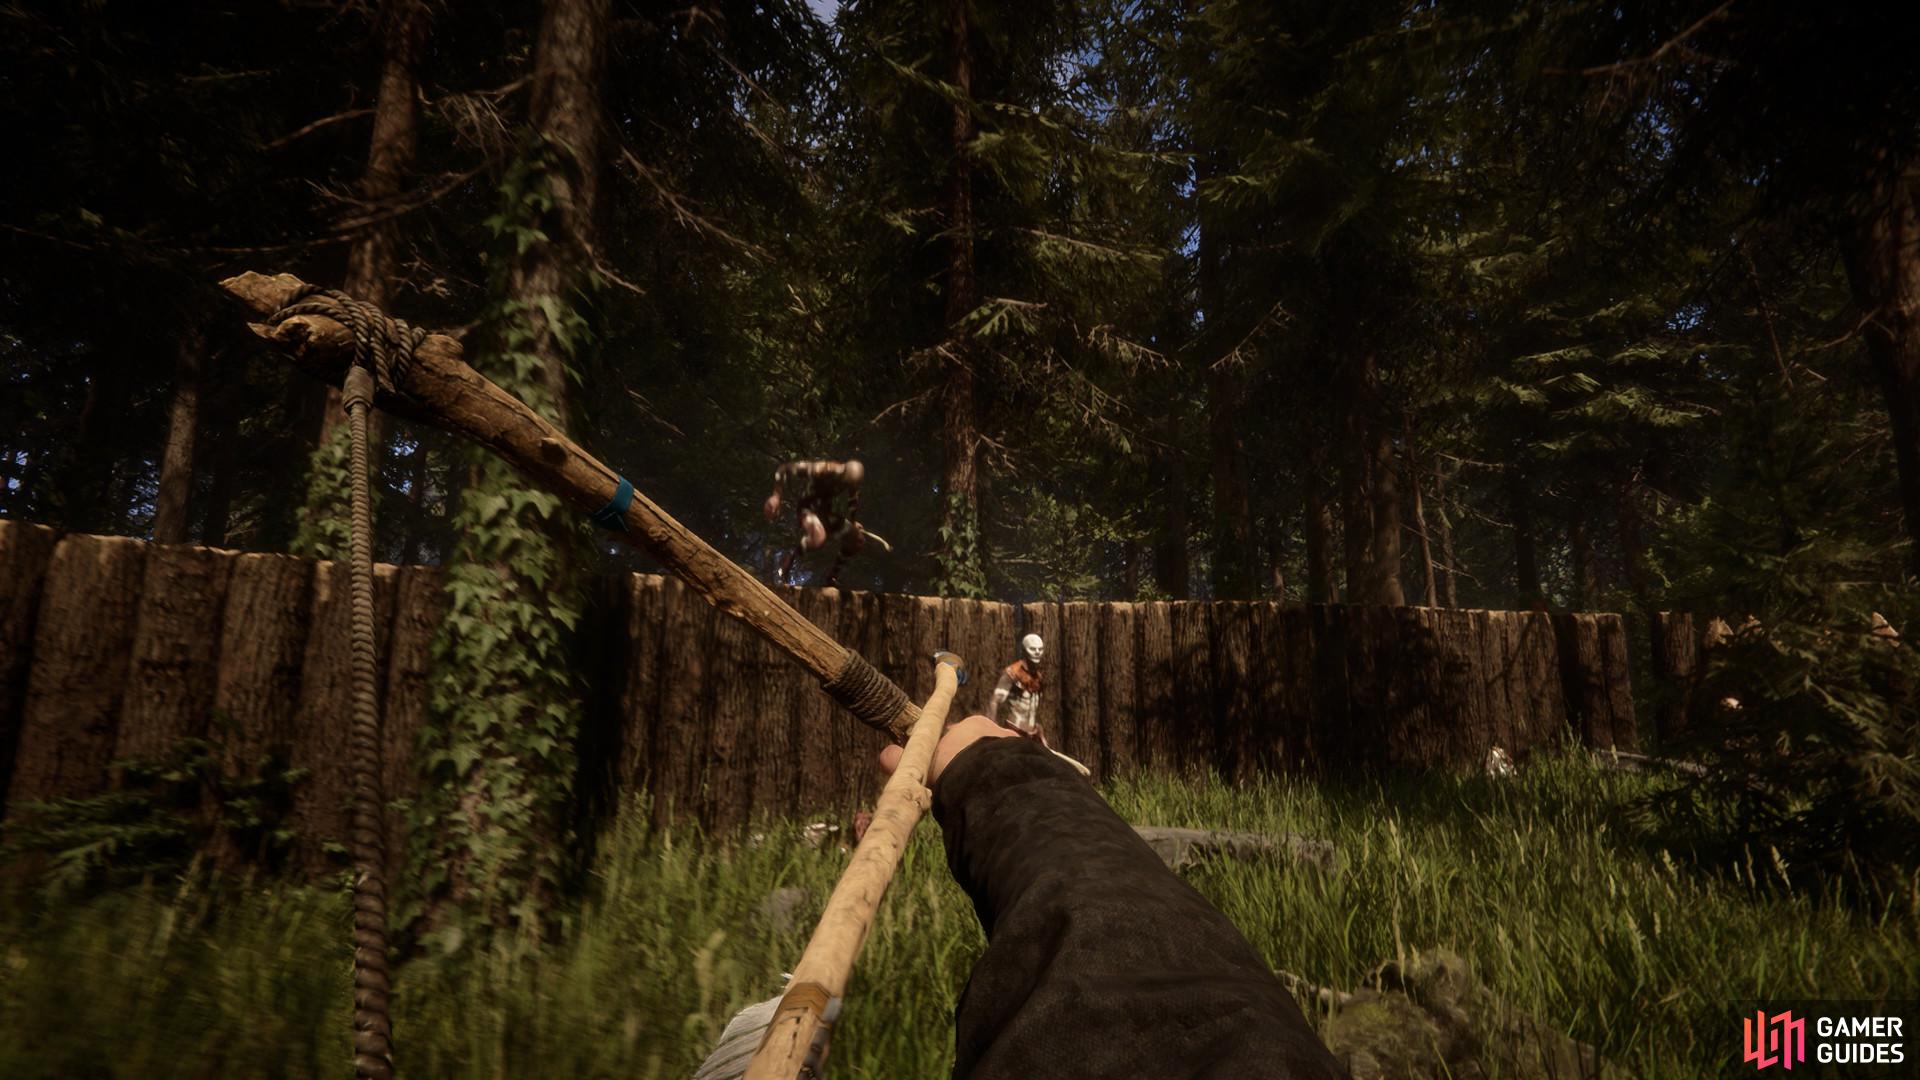 Can your PC run it, or will you stutter trying to hit these targets because you can't handle the Sons of the Forest system requirements? Image via Endnight.